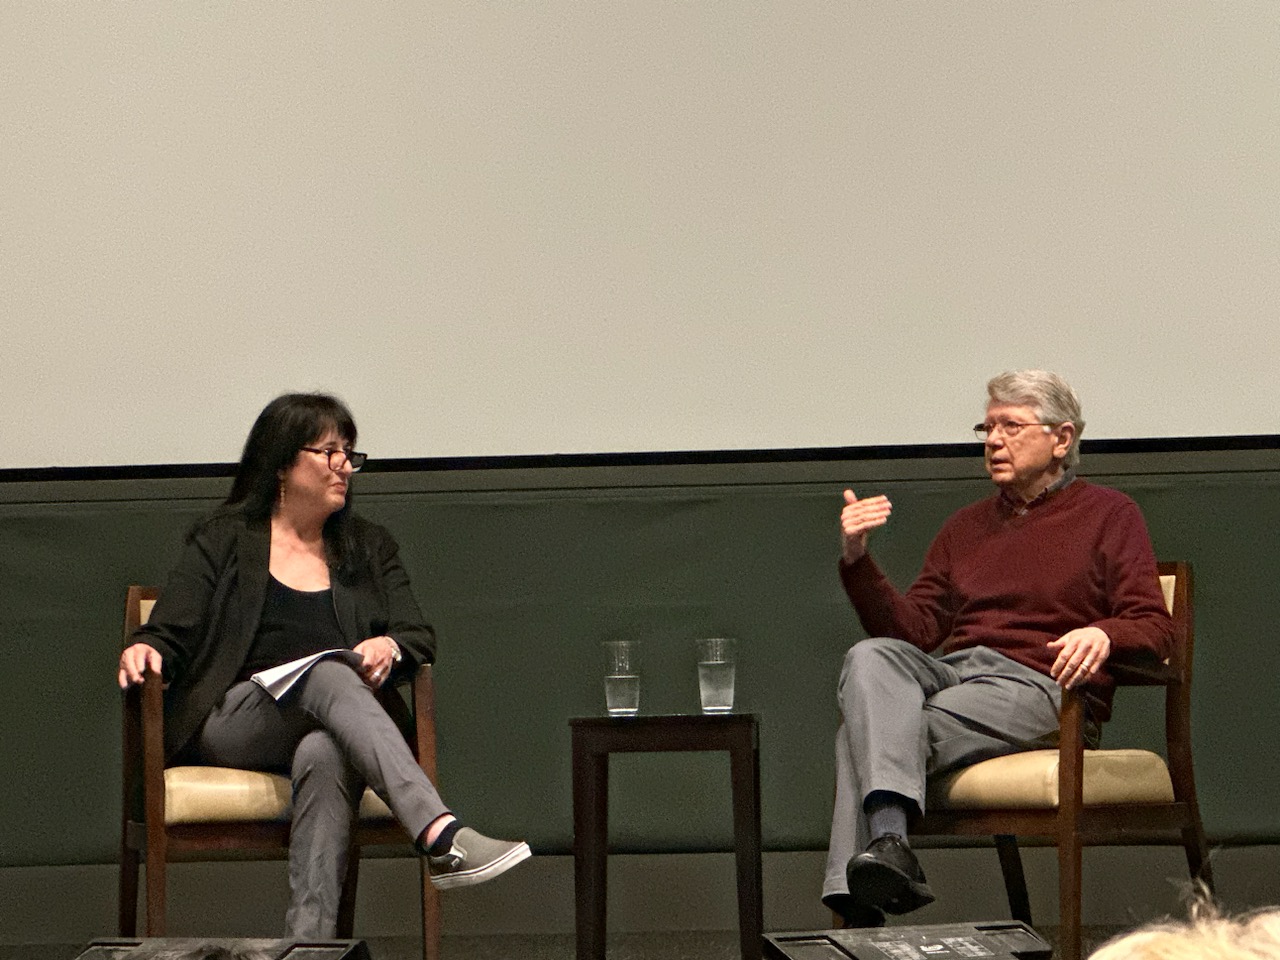 Patrice Petro, Dick Wolf Director of the Carsey-Wolf Center, discusses Trouble in Paradise with emeritus Professor of Film and Media Studies Charles Wolf. They are seated in armchairs, and Wolfe is gesturing as he makes a point about the film.